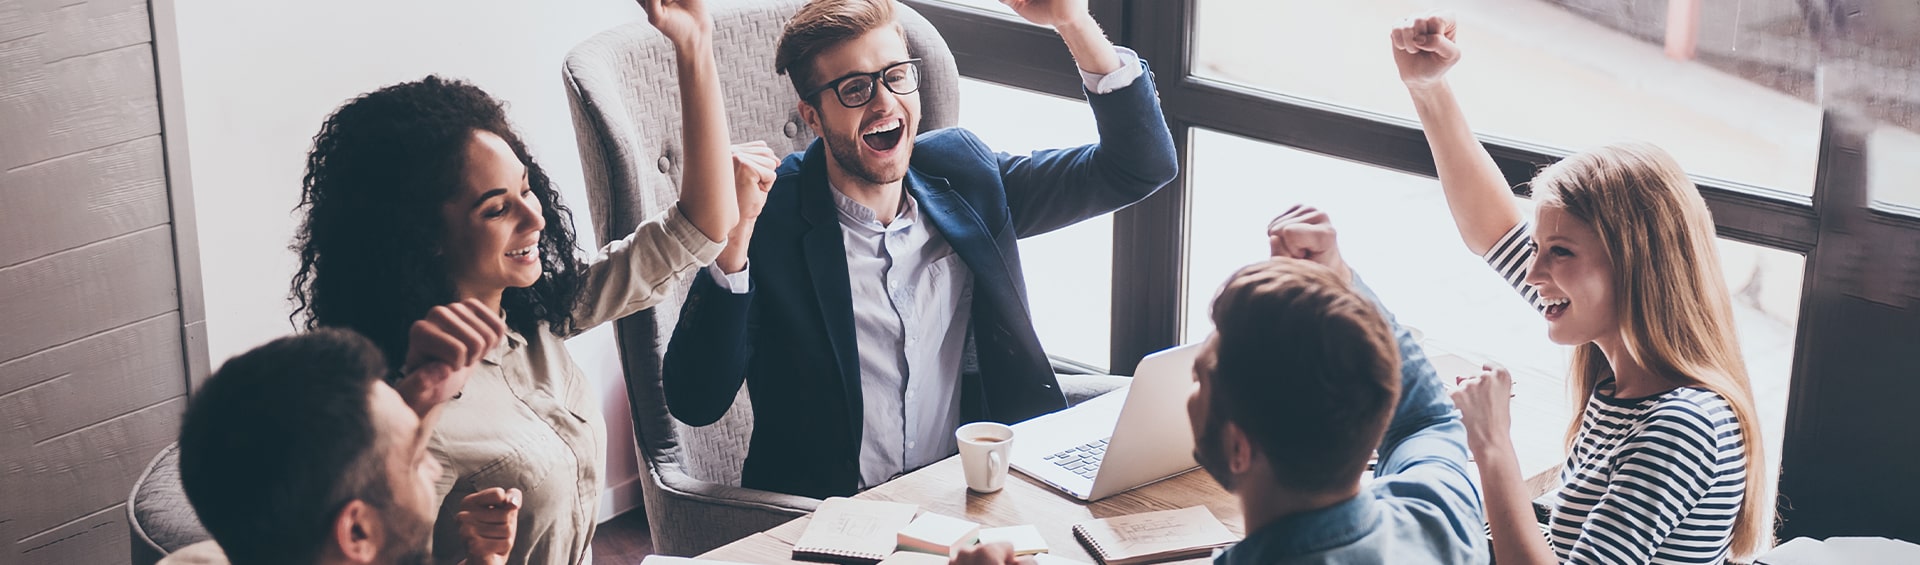 Implement a Winning Employee Communications Strategy: Tips and Tools That Build Culture and Drive Engagement